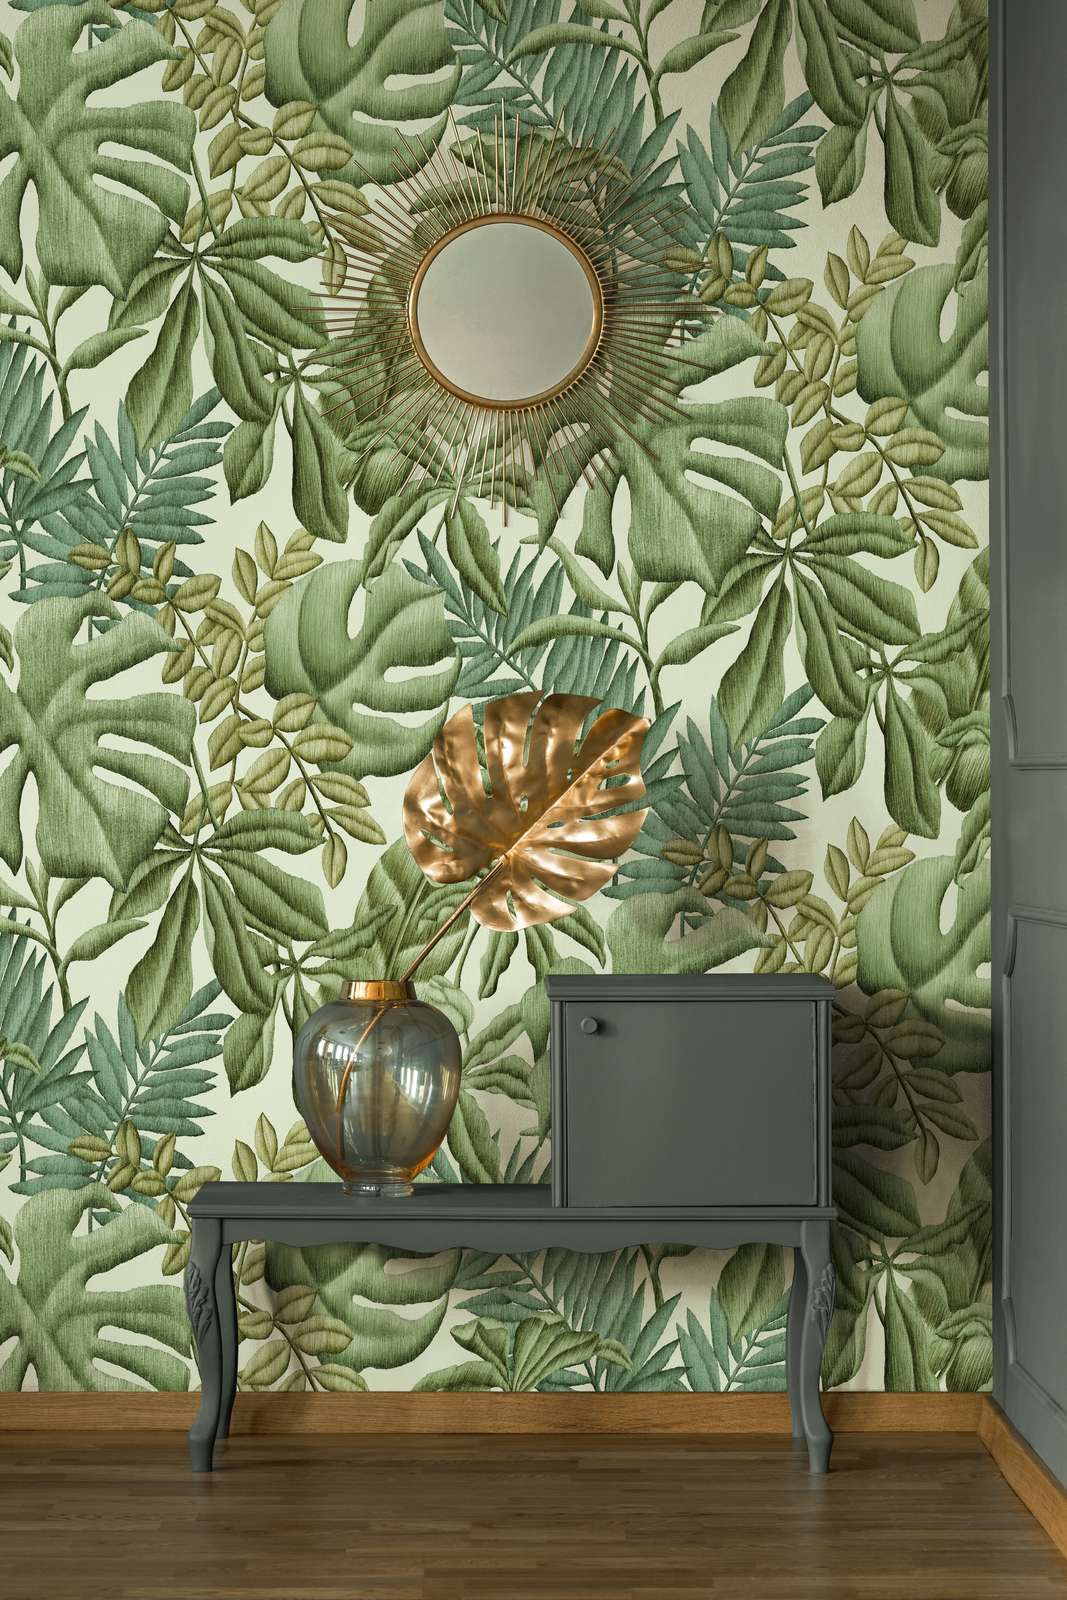             Non-woven wallpaper with various leaves - green, cream
        